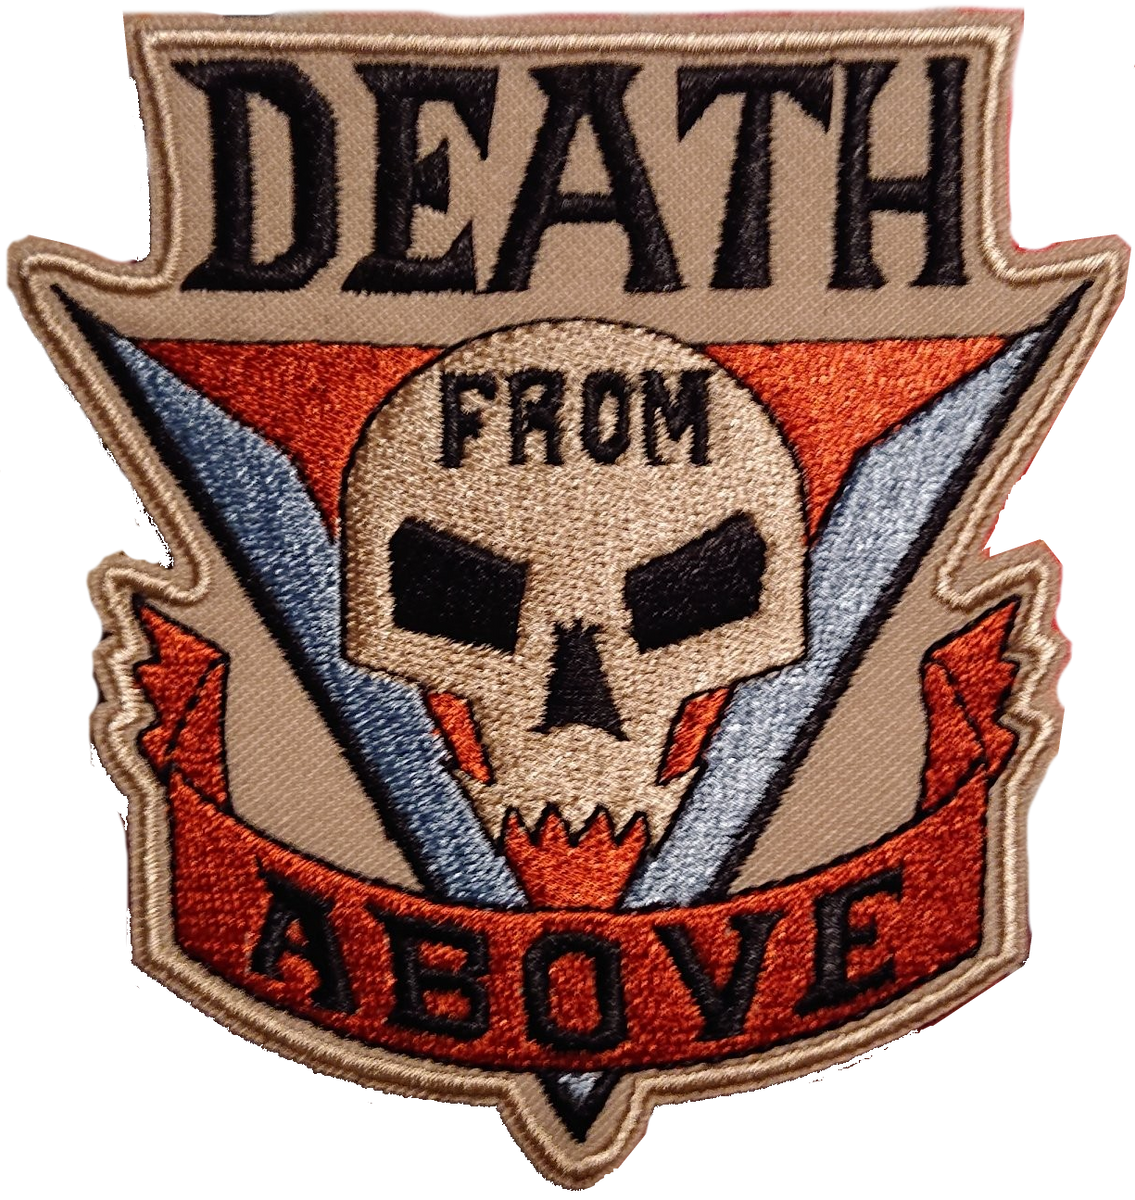 Death From Above Wallpapers